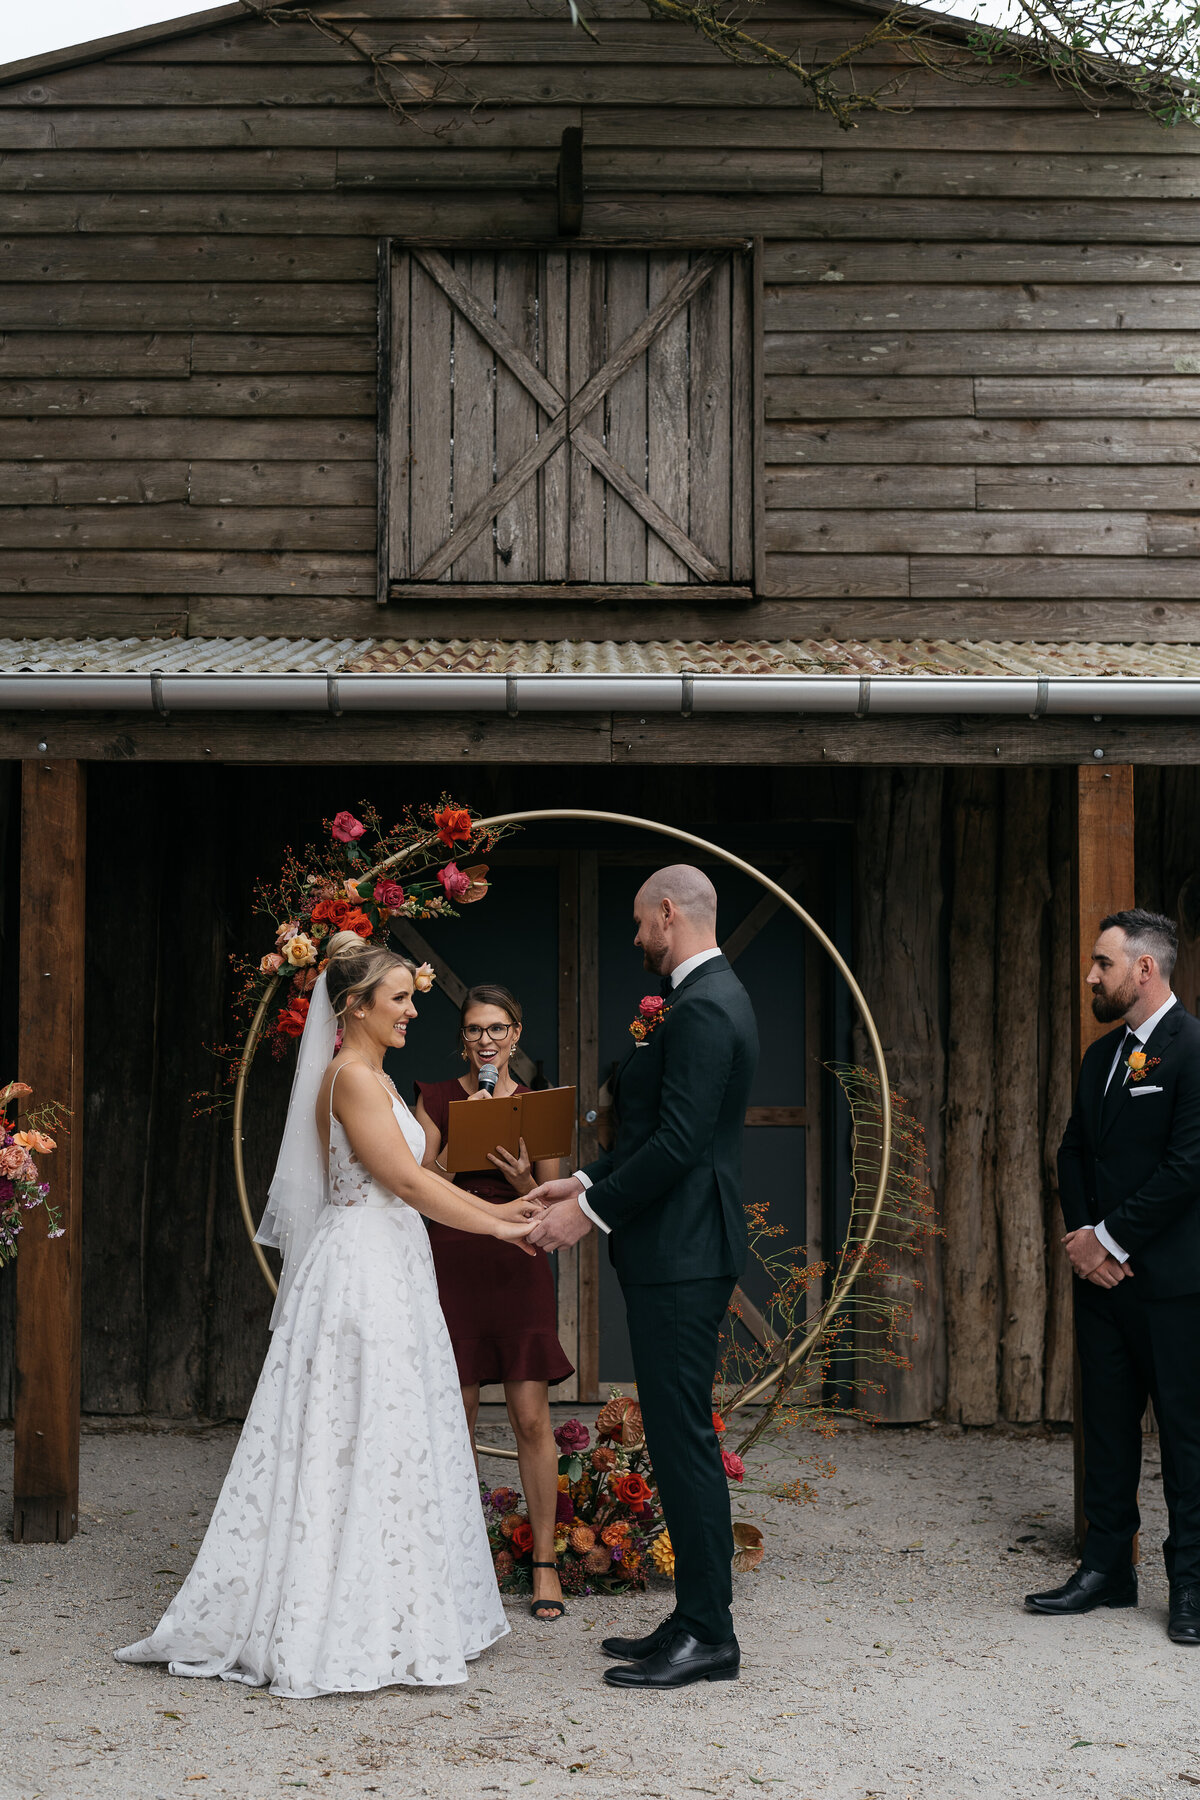 Courtney Laura Photography, Yarra Valley Wedding Photographer, The Farm Yarra Valley, Cassie and Kieren-445